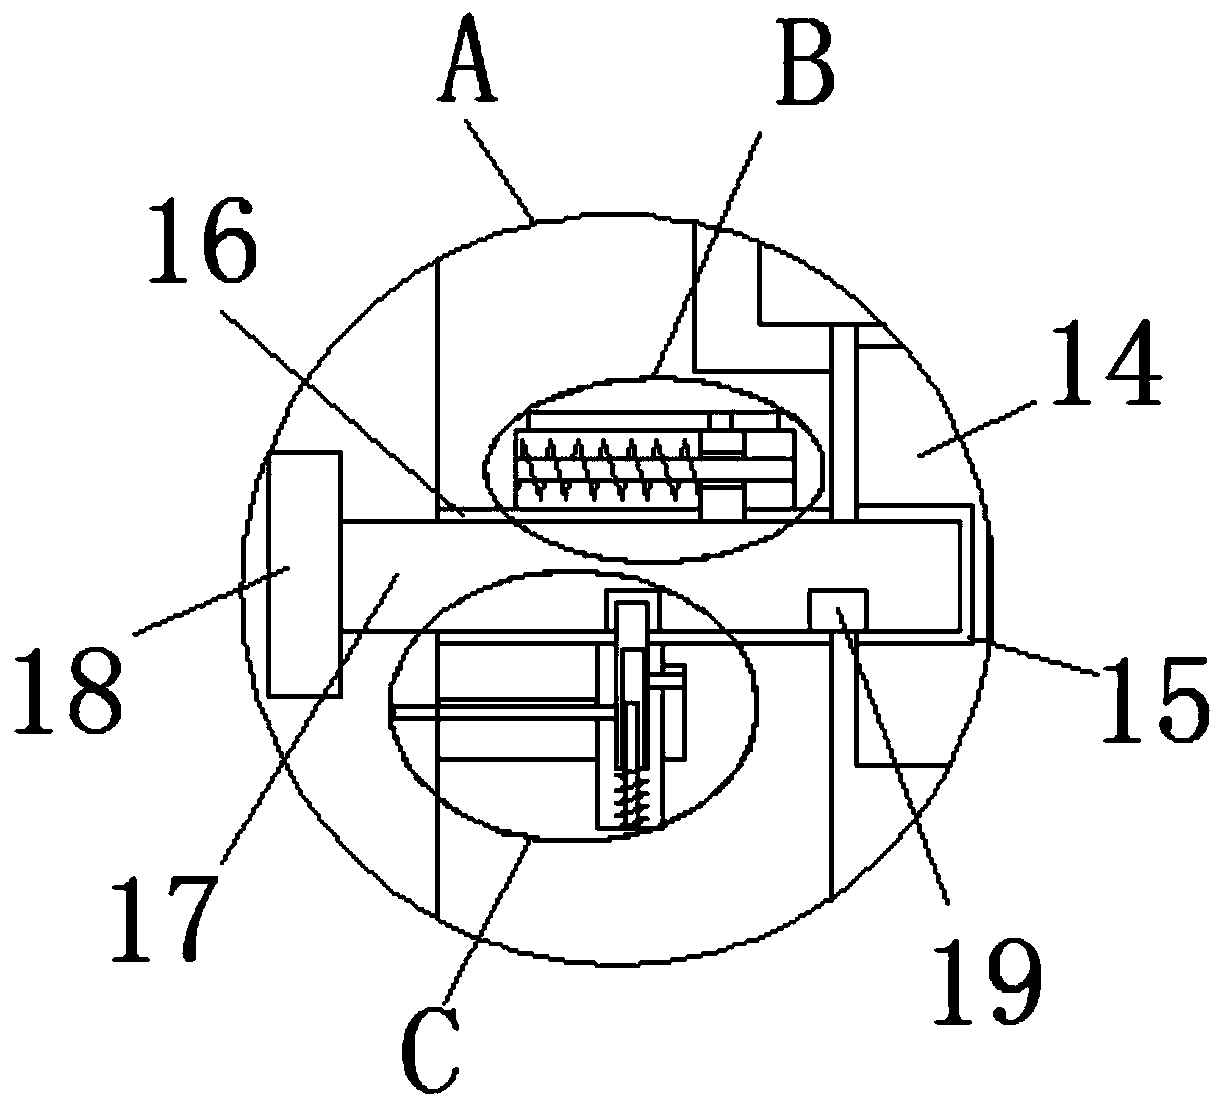 Building construction supporting device